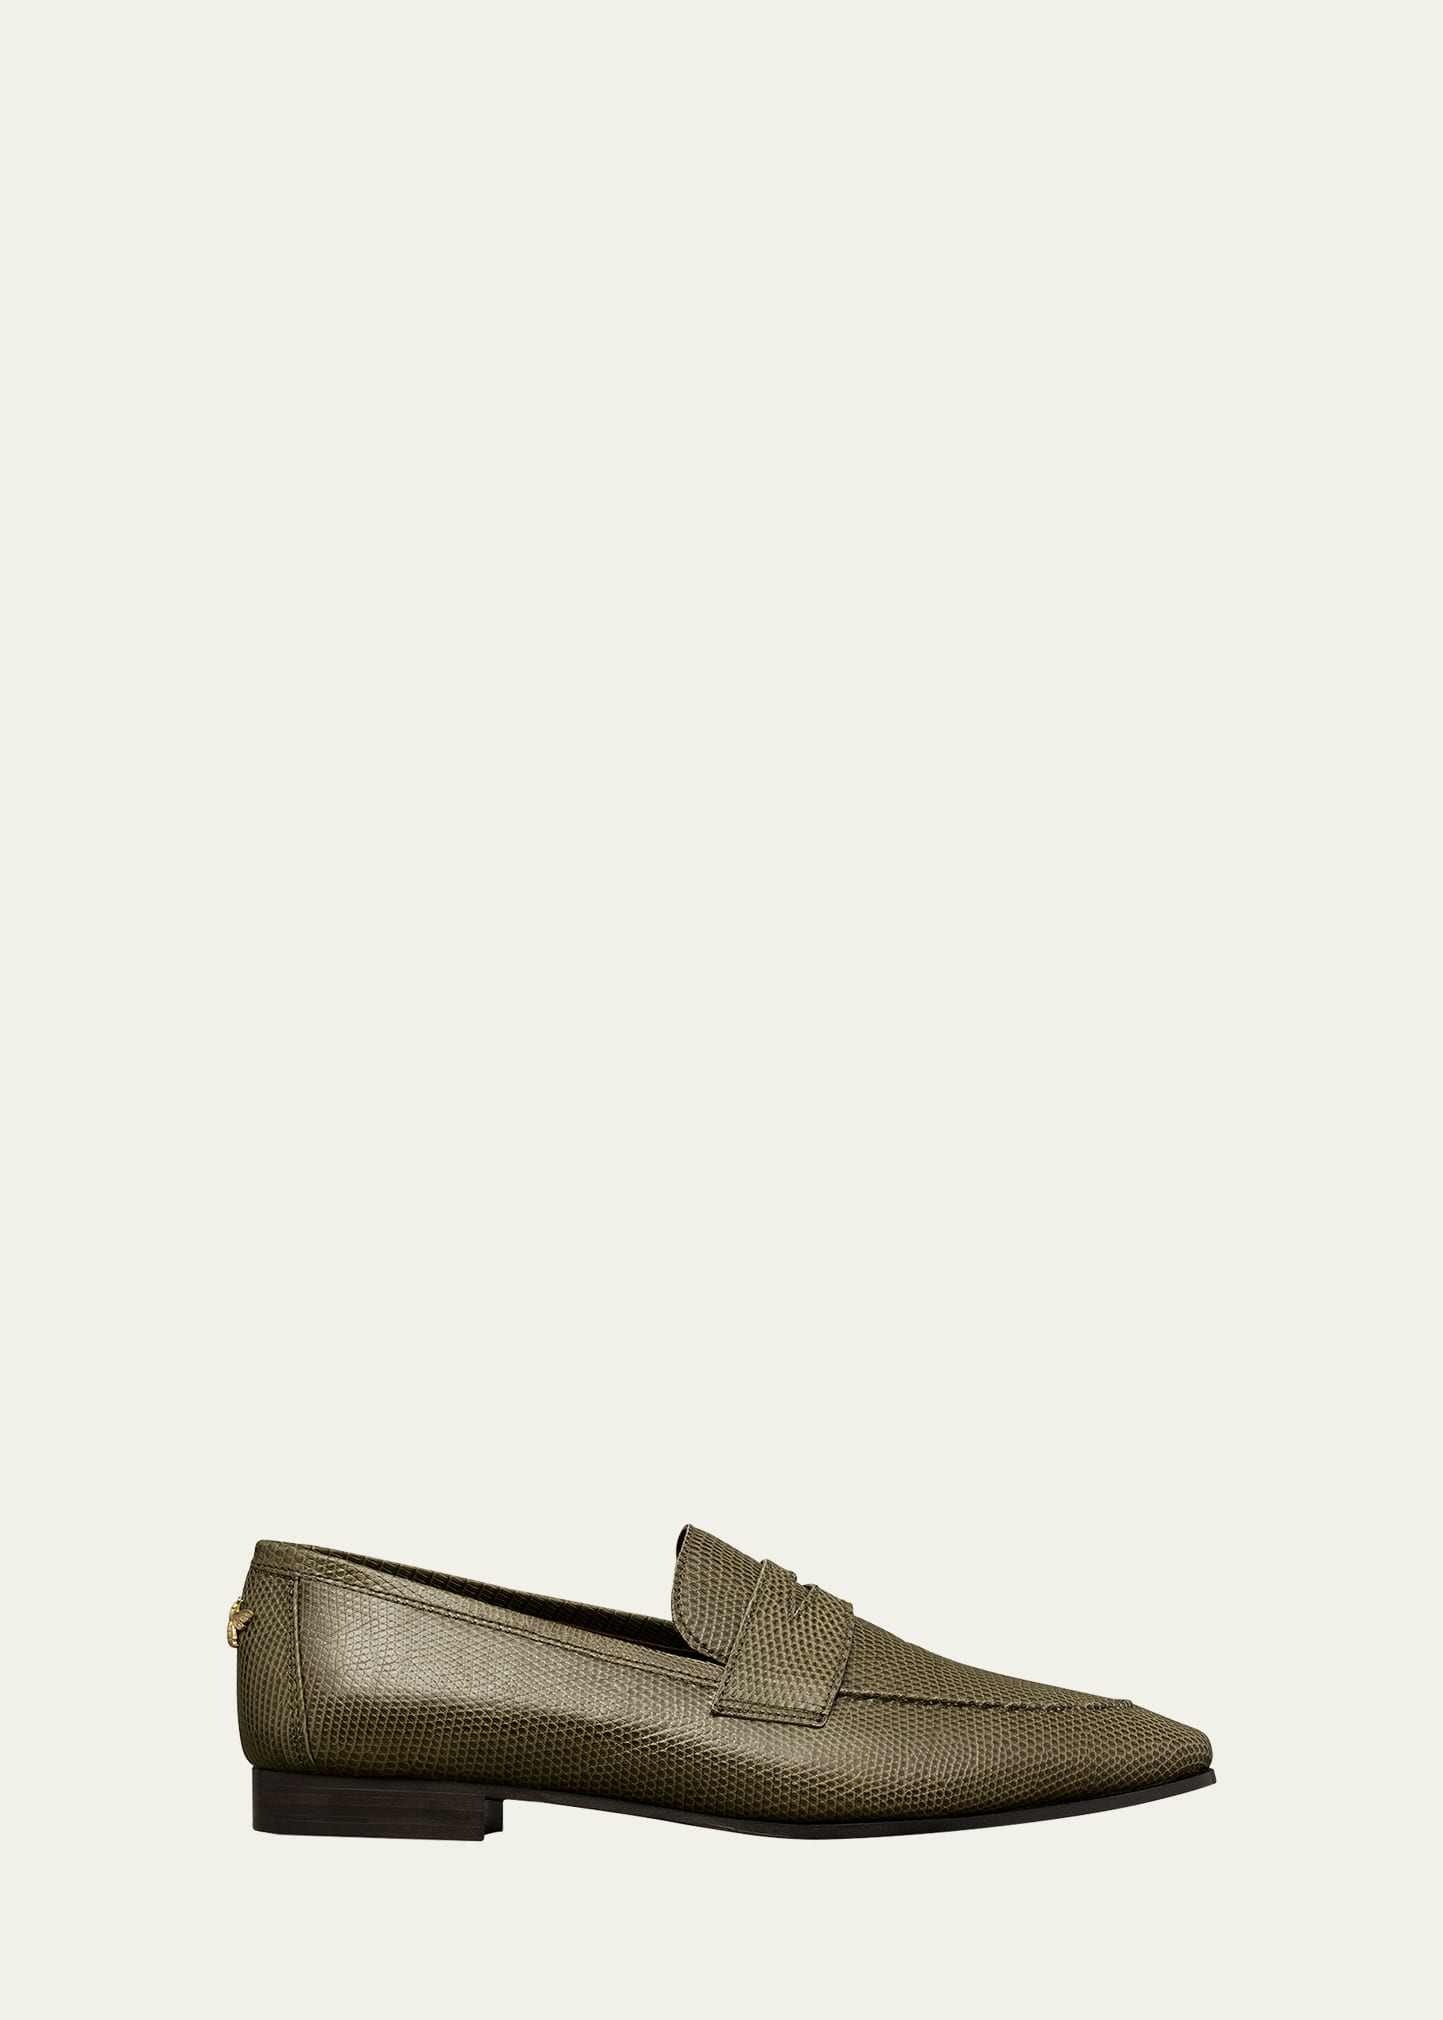 Bougeotte Flaneur Lizard Leather Penny Loafers